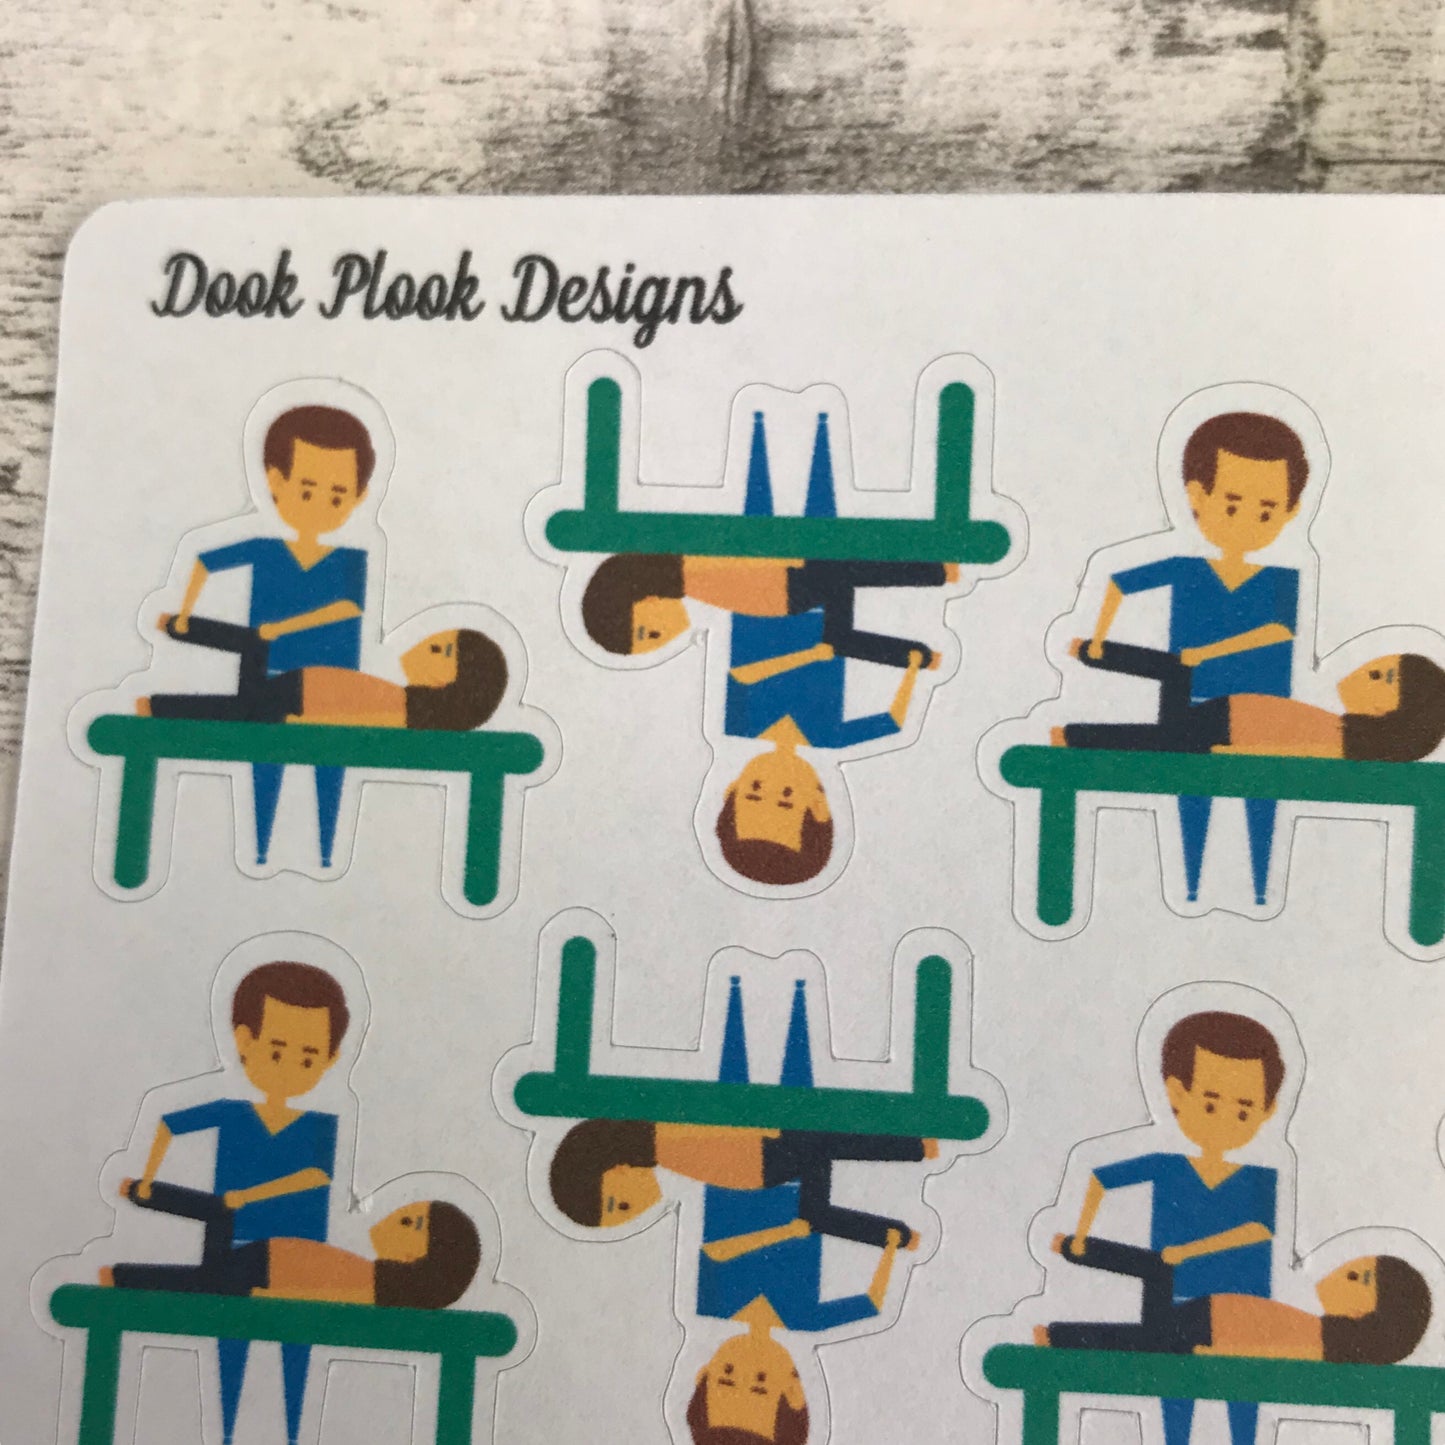 Physio stickers (DPD540)